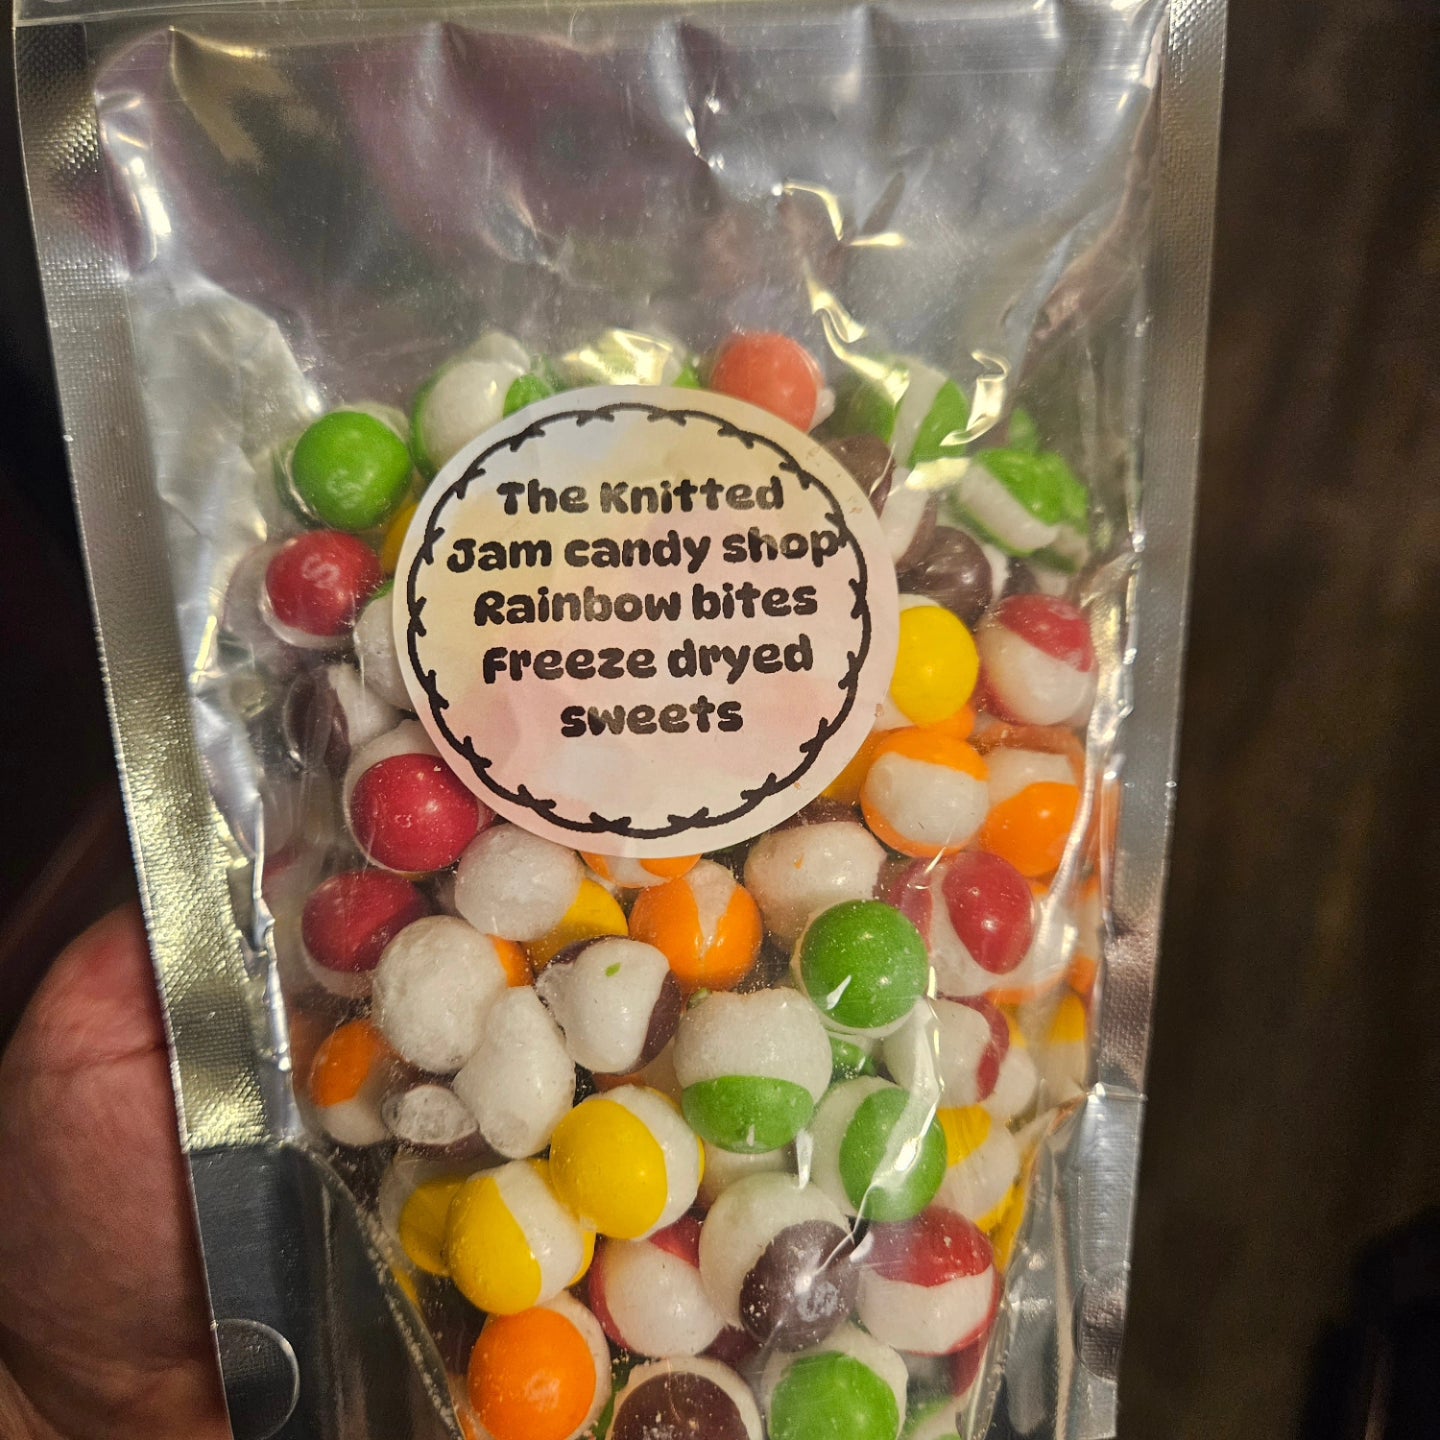 Freeze dried candies